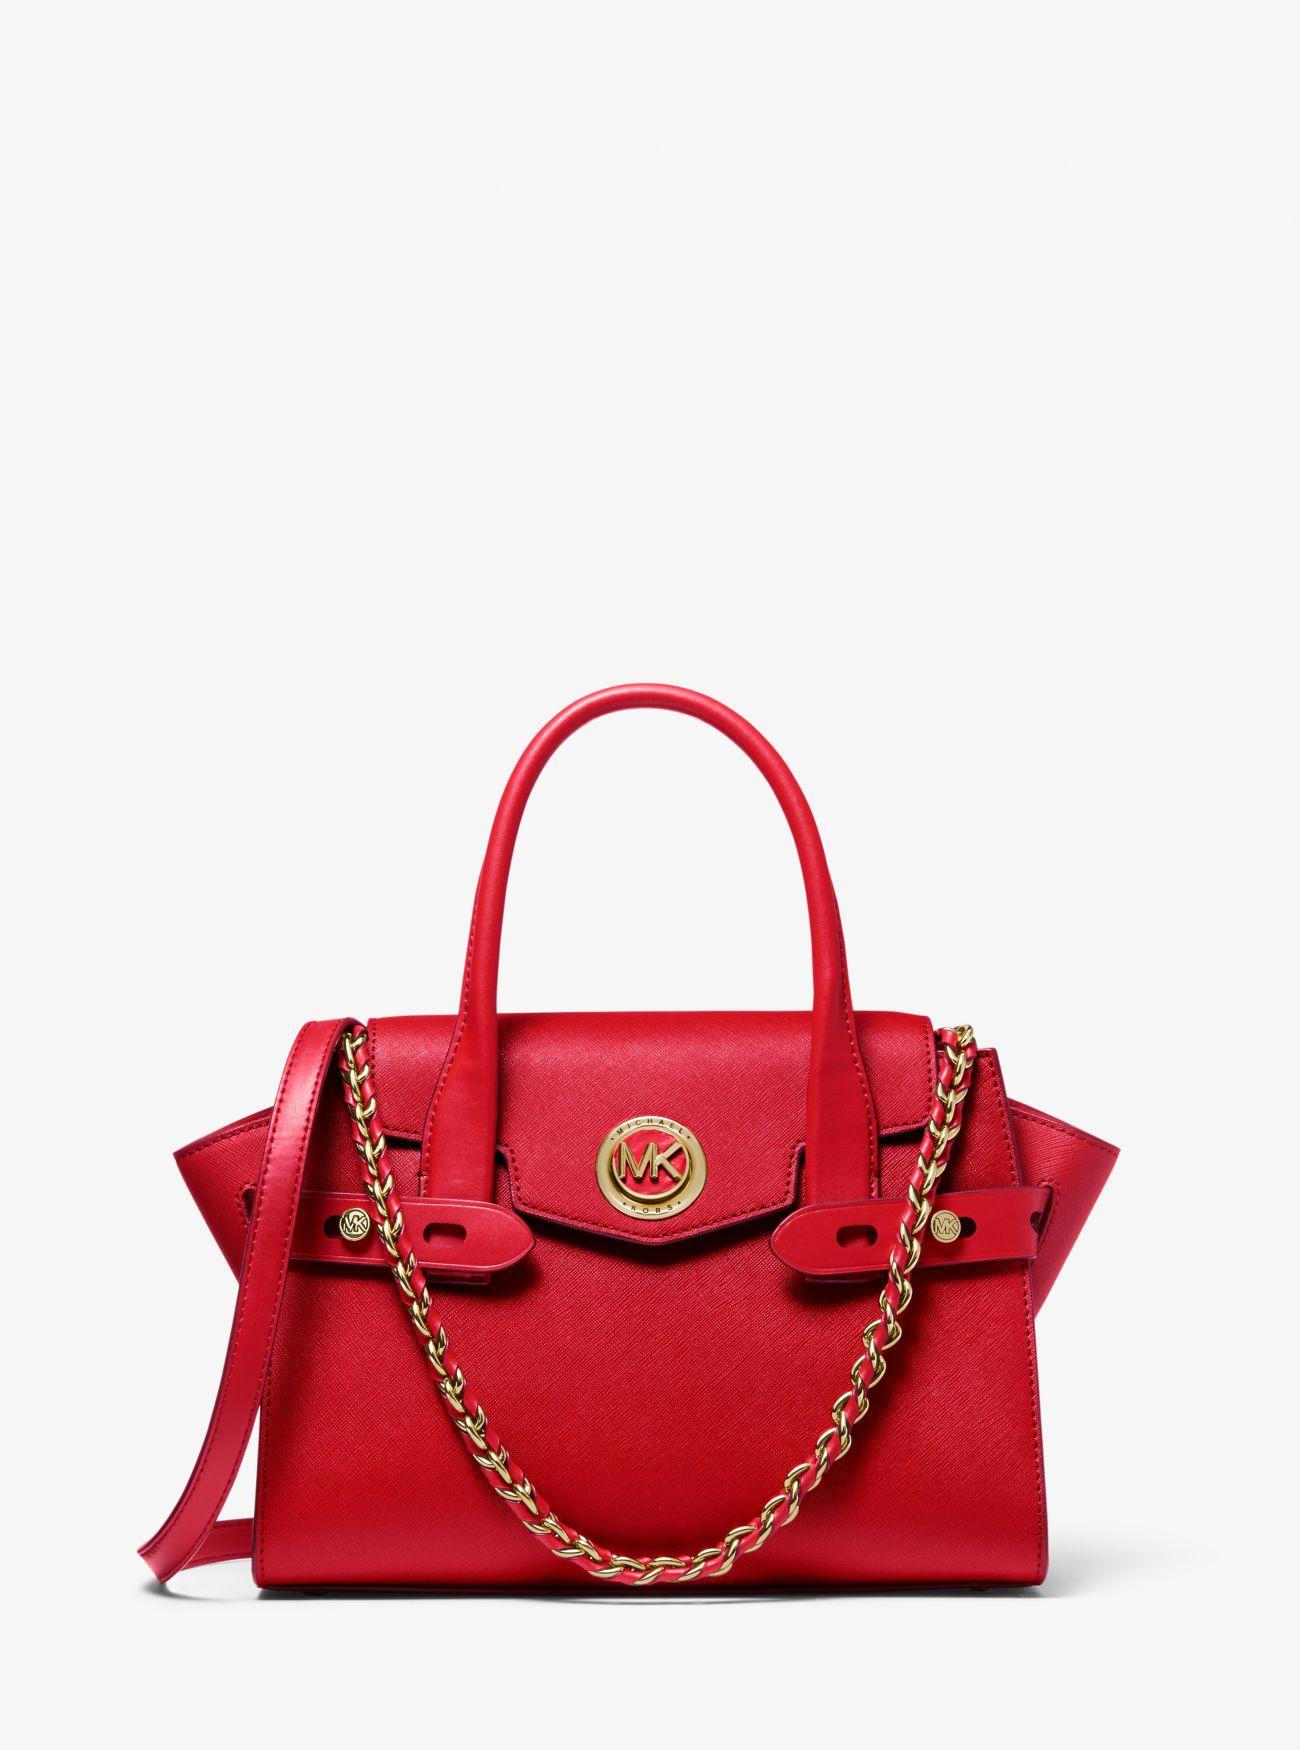 Kors Small Saffiano Leather Belted Satchel in Bright Red (Red) - Lyst